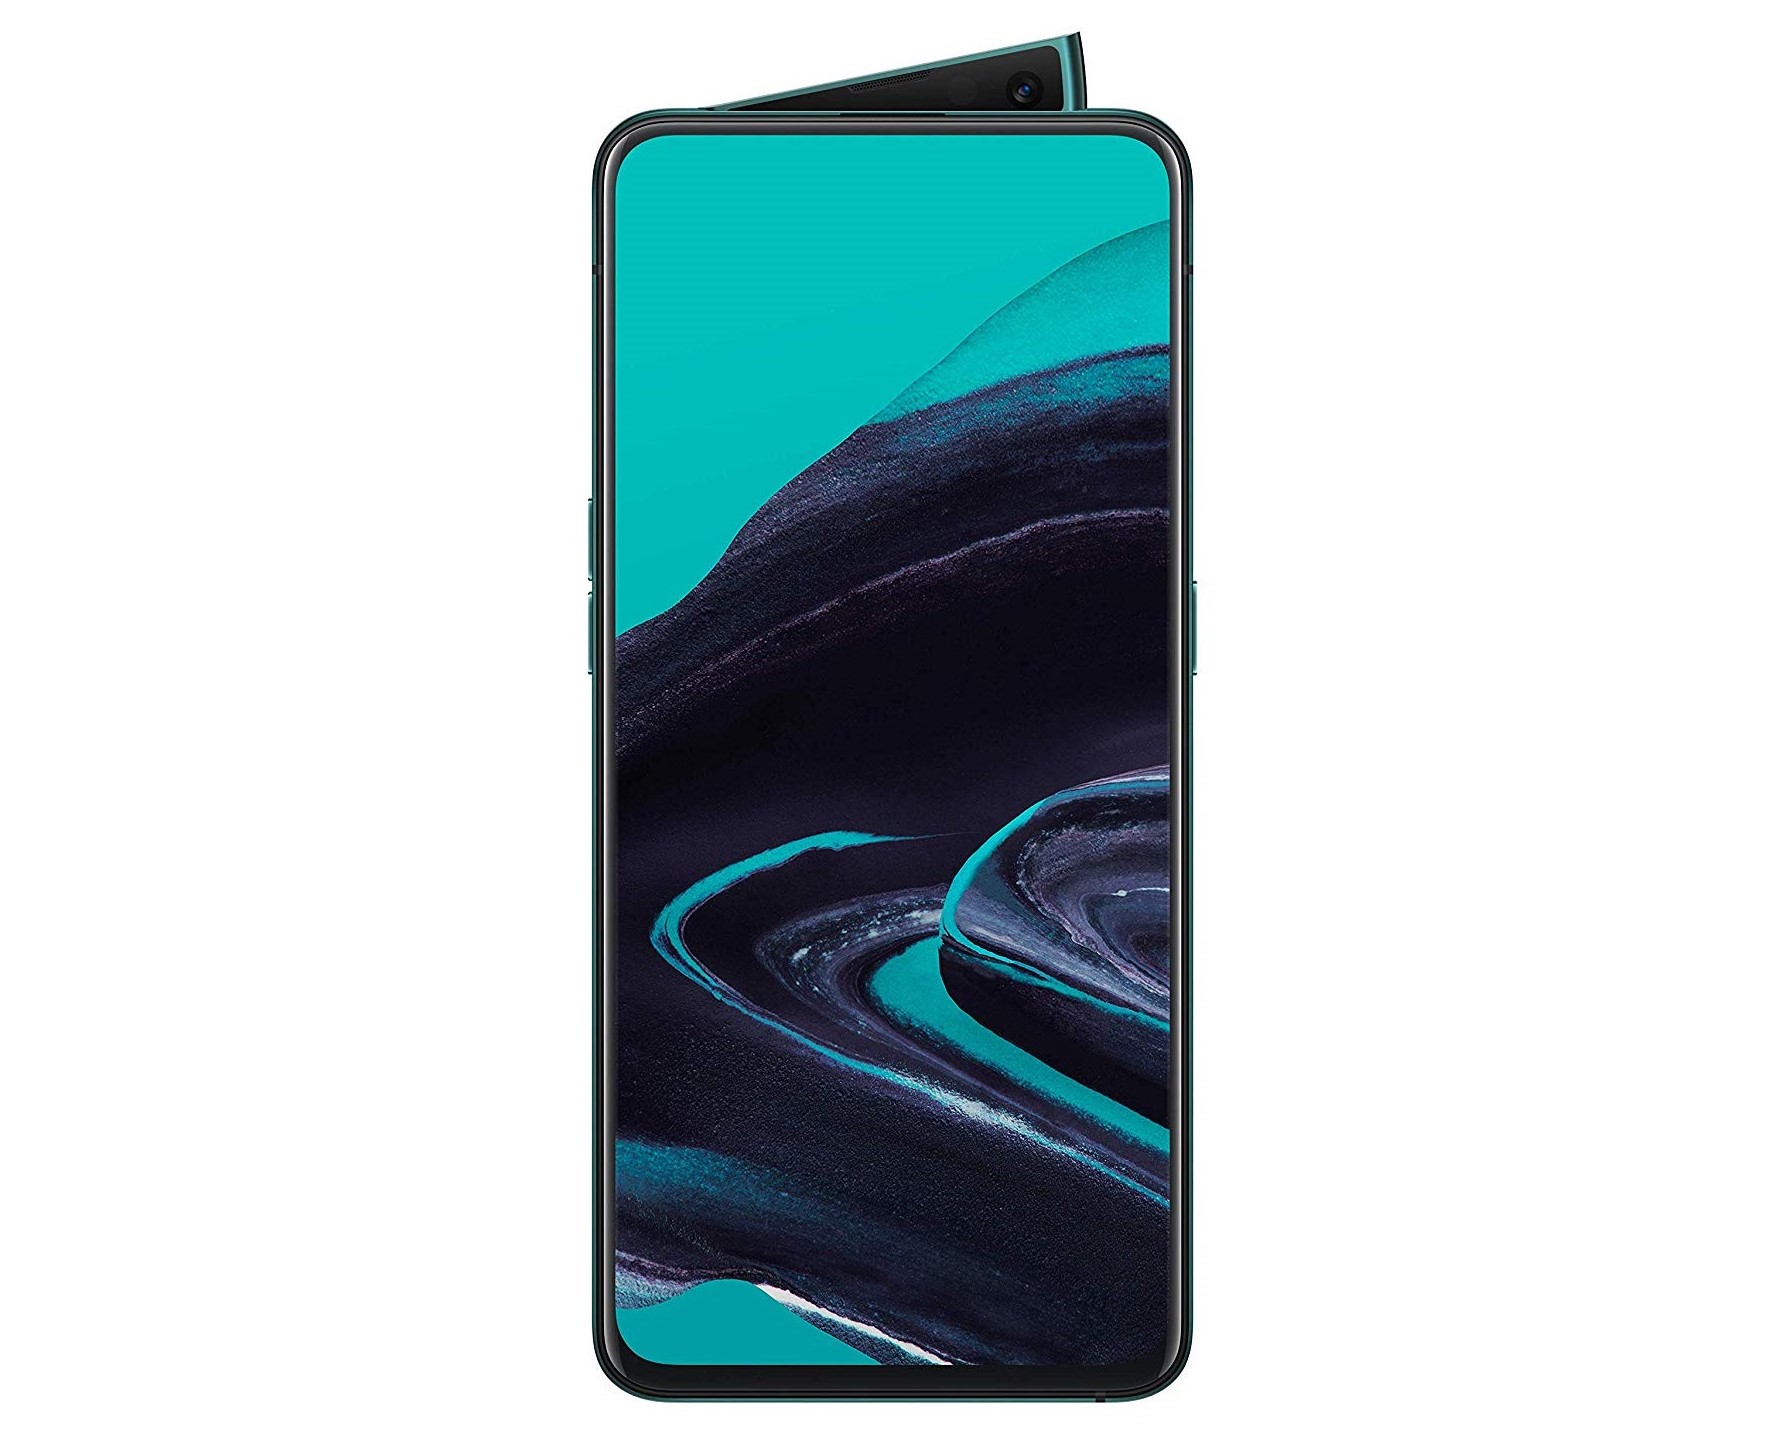 Oppo Reno2 Smartphone in Review: Lackluster Camera Performance 